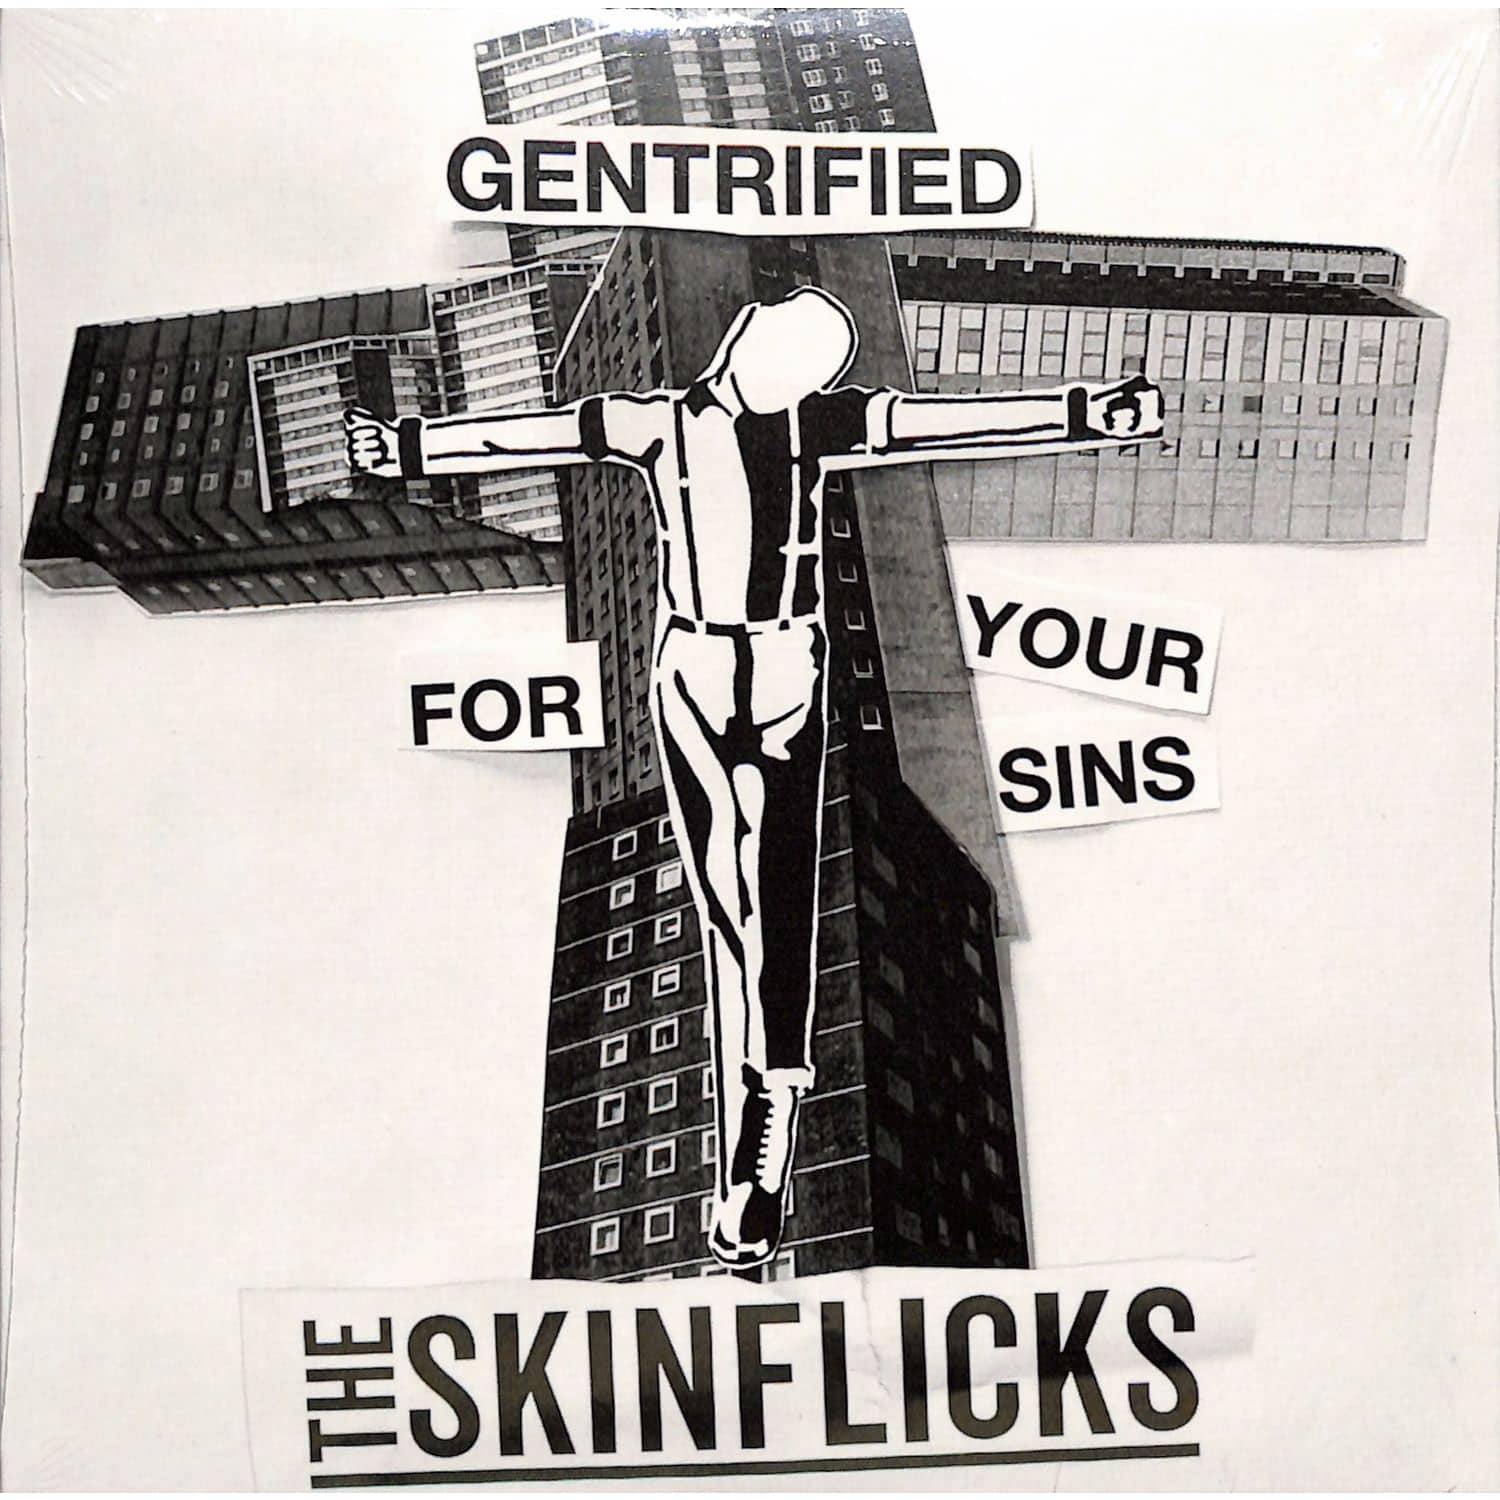 The Skinflicks - GENTRIFIED FOR YOUR SINS  